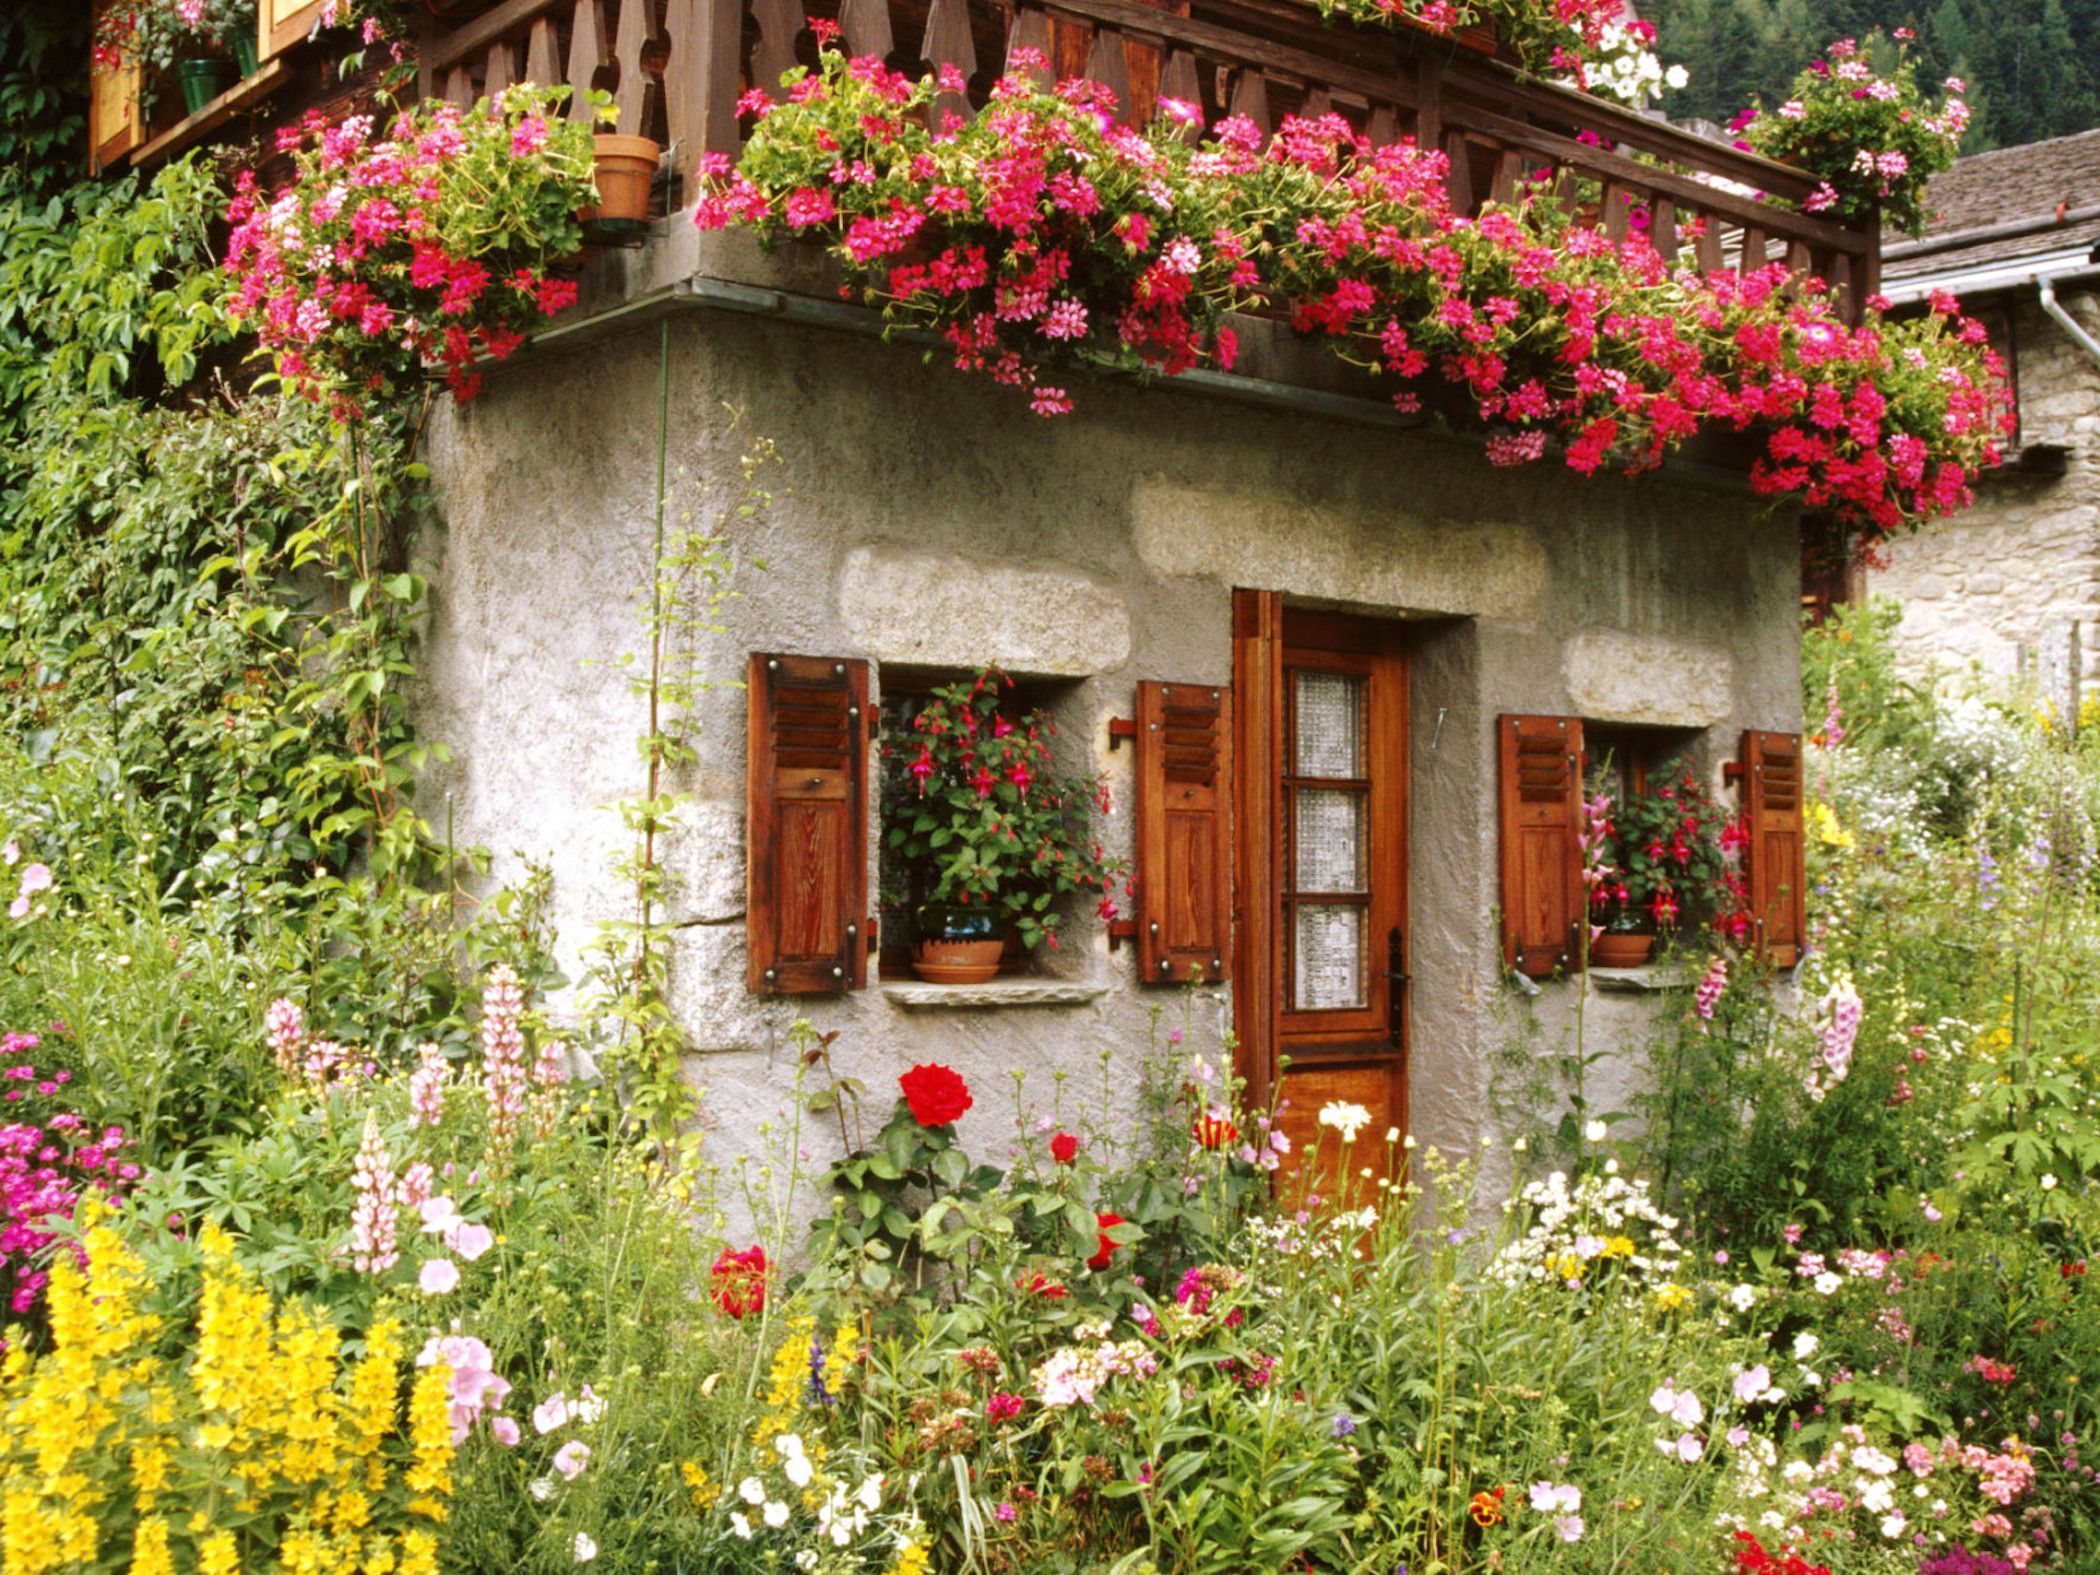 House Decorated With Flowers - HD Wallpaper 